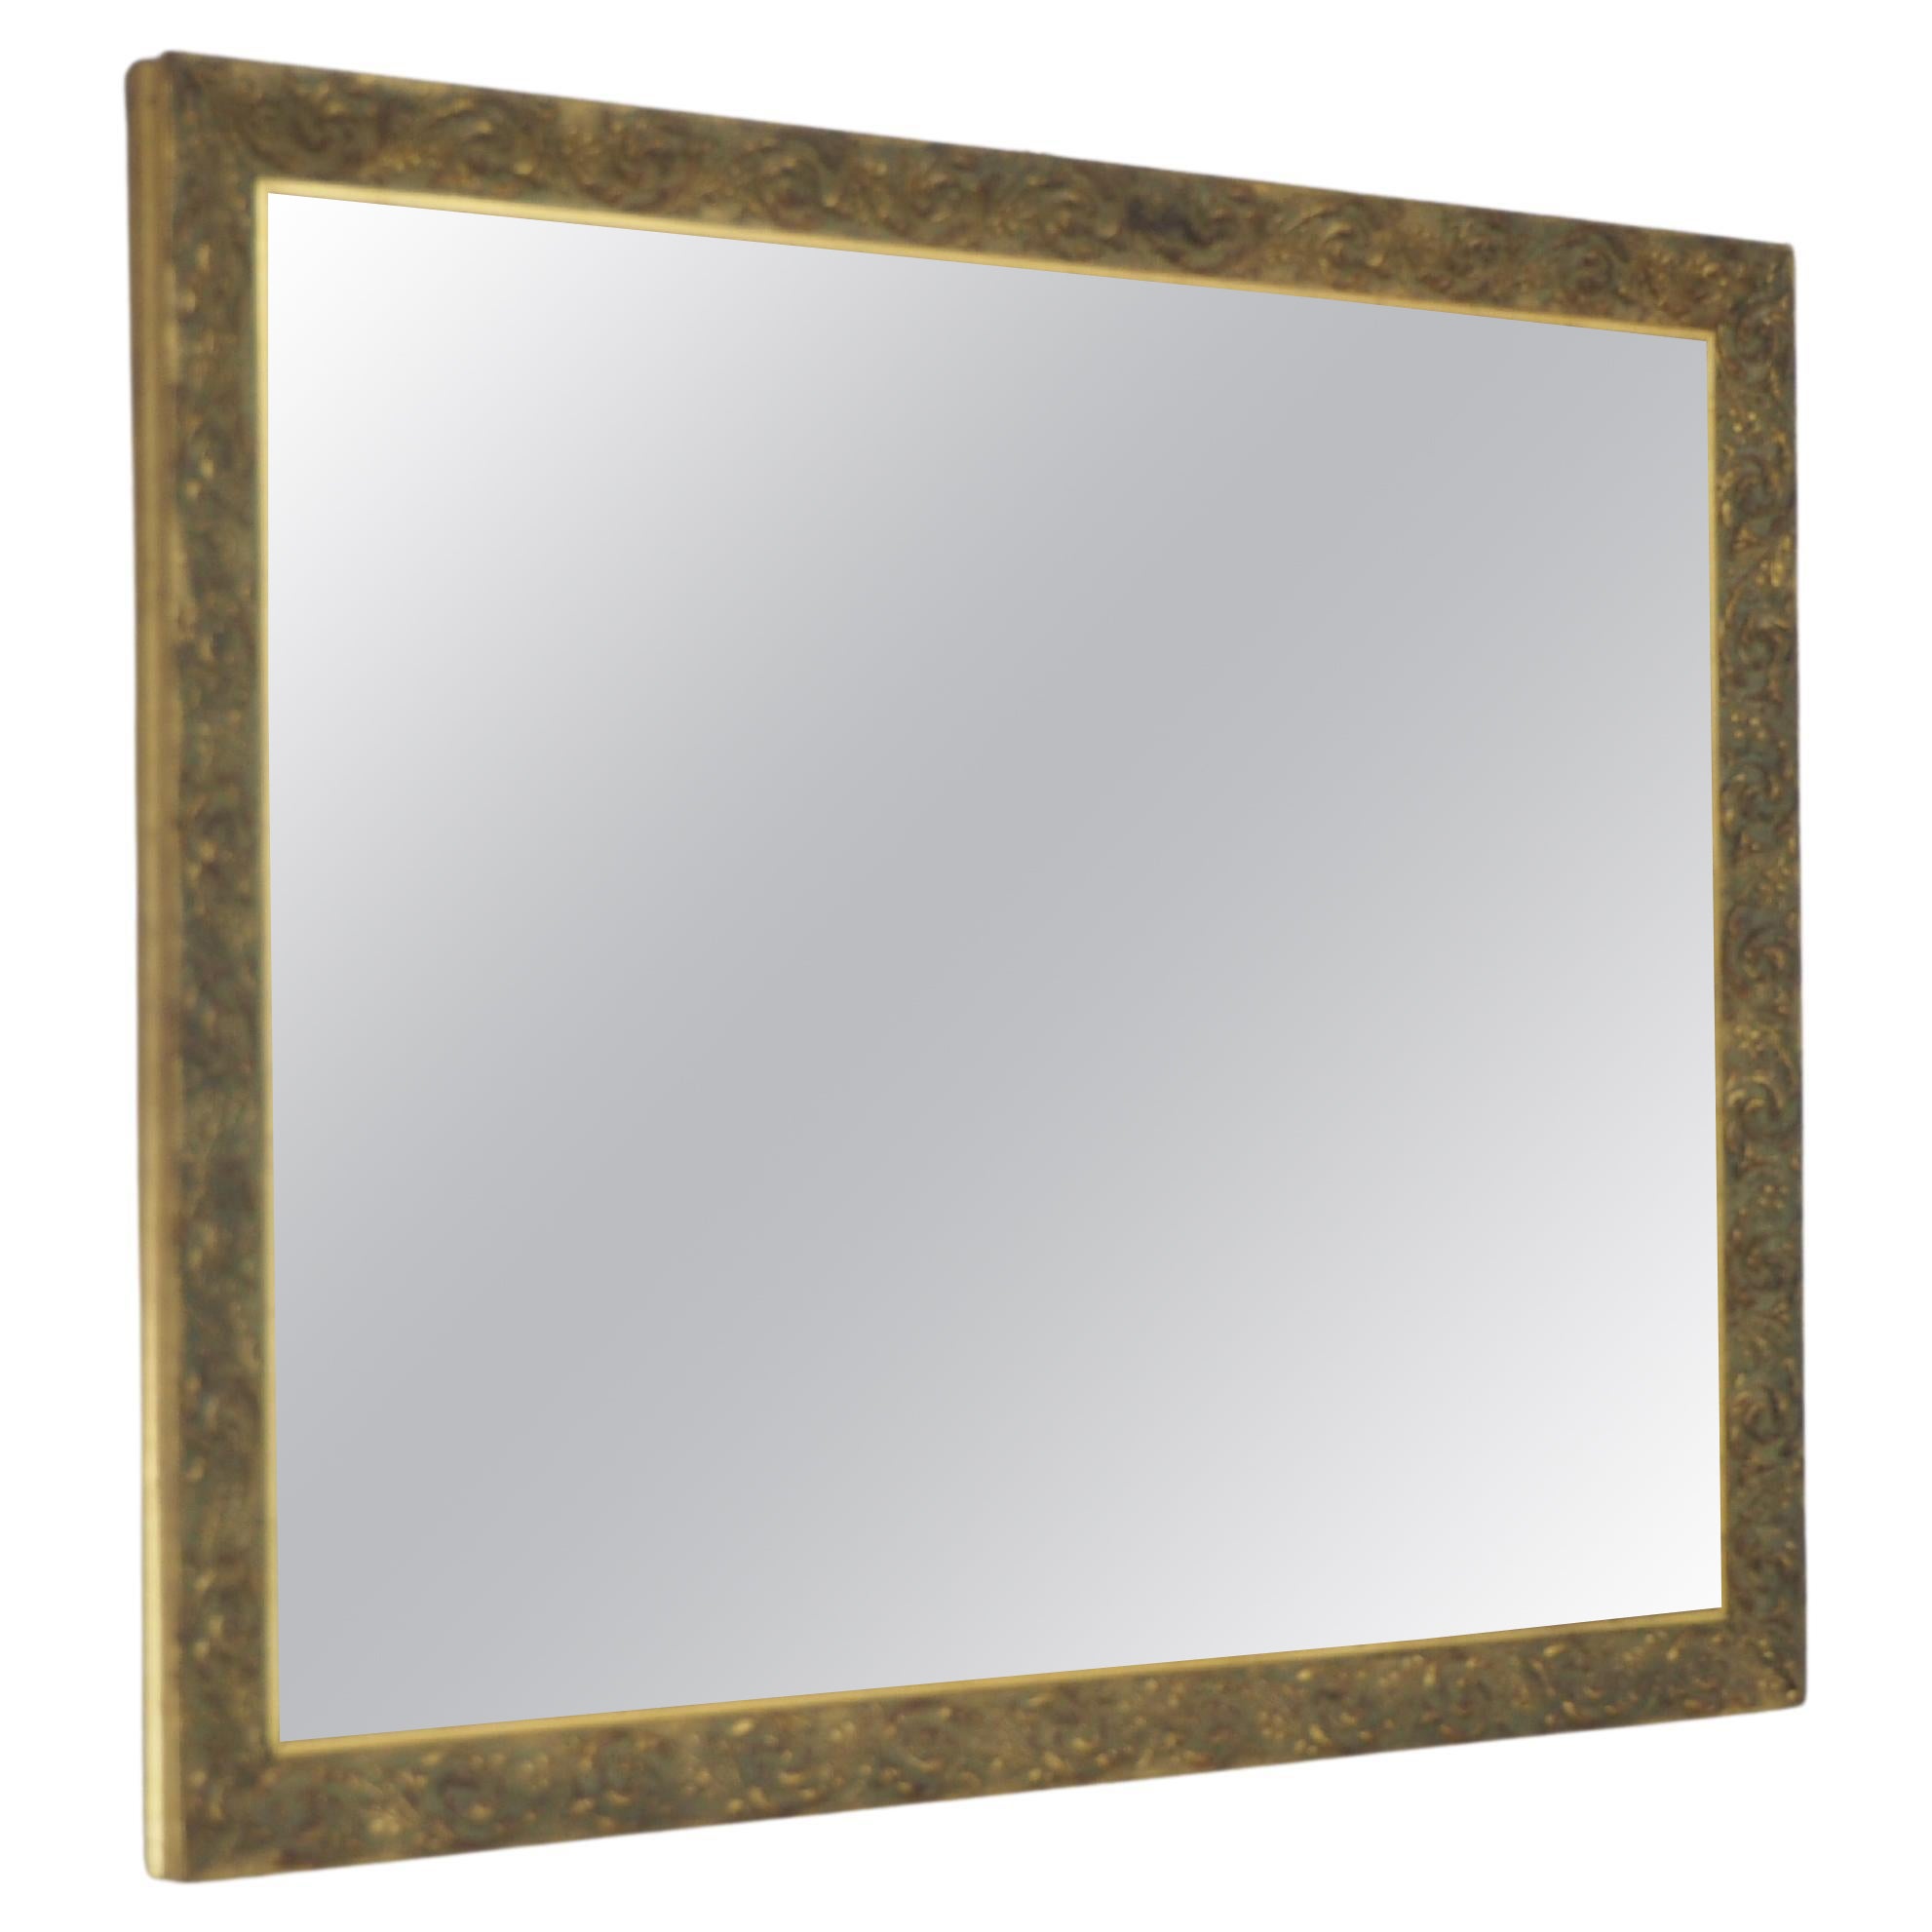 Antique Mirror with Wood Frame